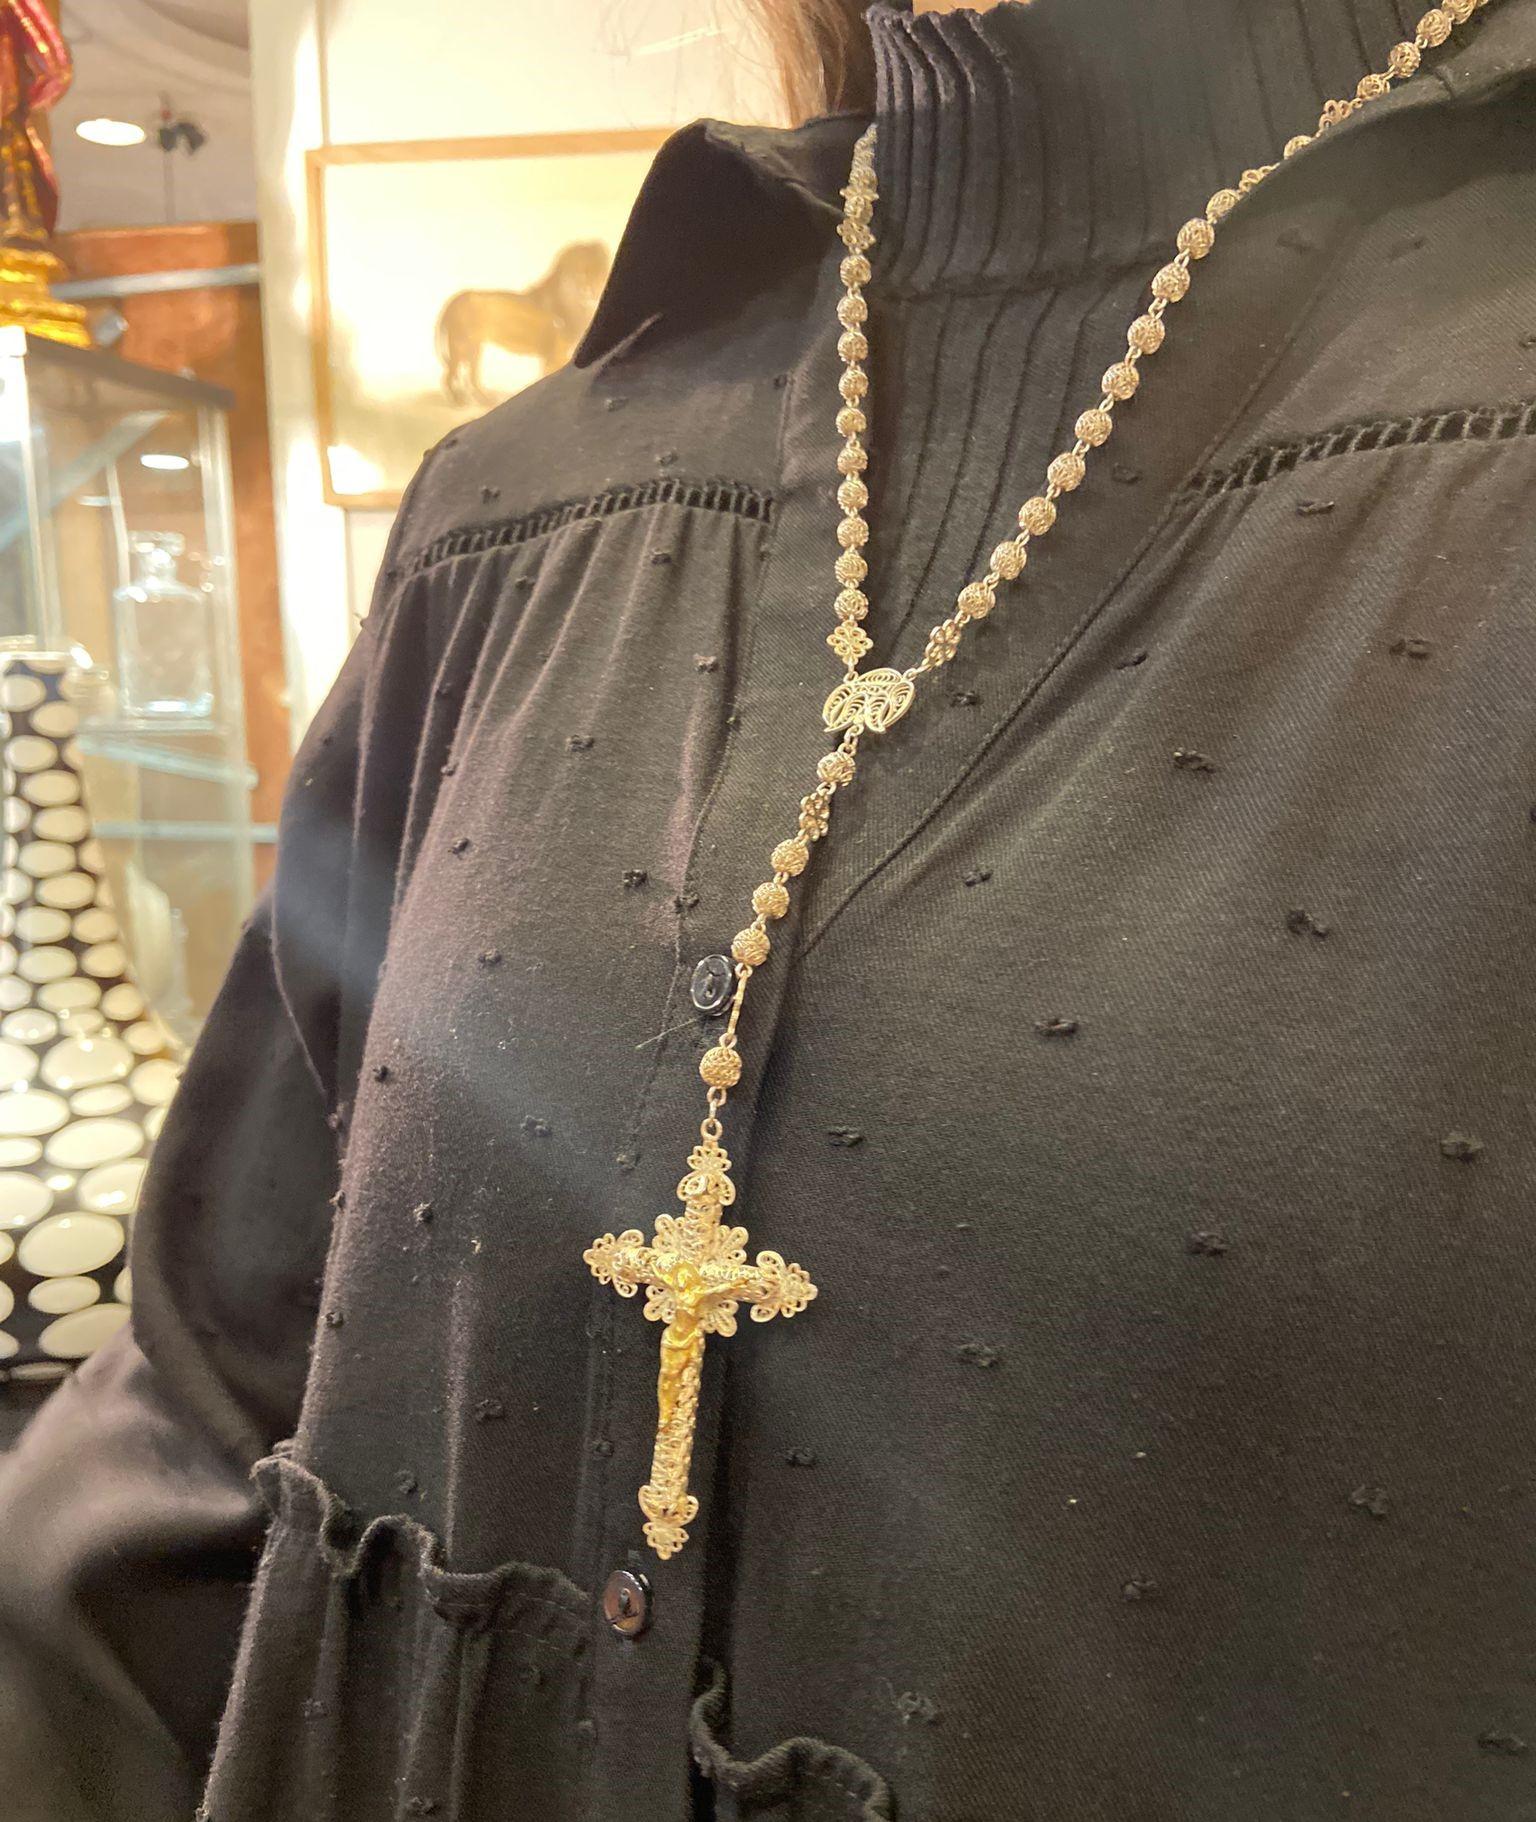 Beautiful and delicate rosary from the 19th century made of silver. Silver filigree beads and openwork cross, featuring a gilded silver Christ.
Magnificent collector's piece in very good condition for its age and use.
The rosary is configured in